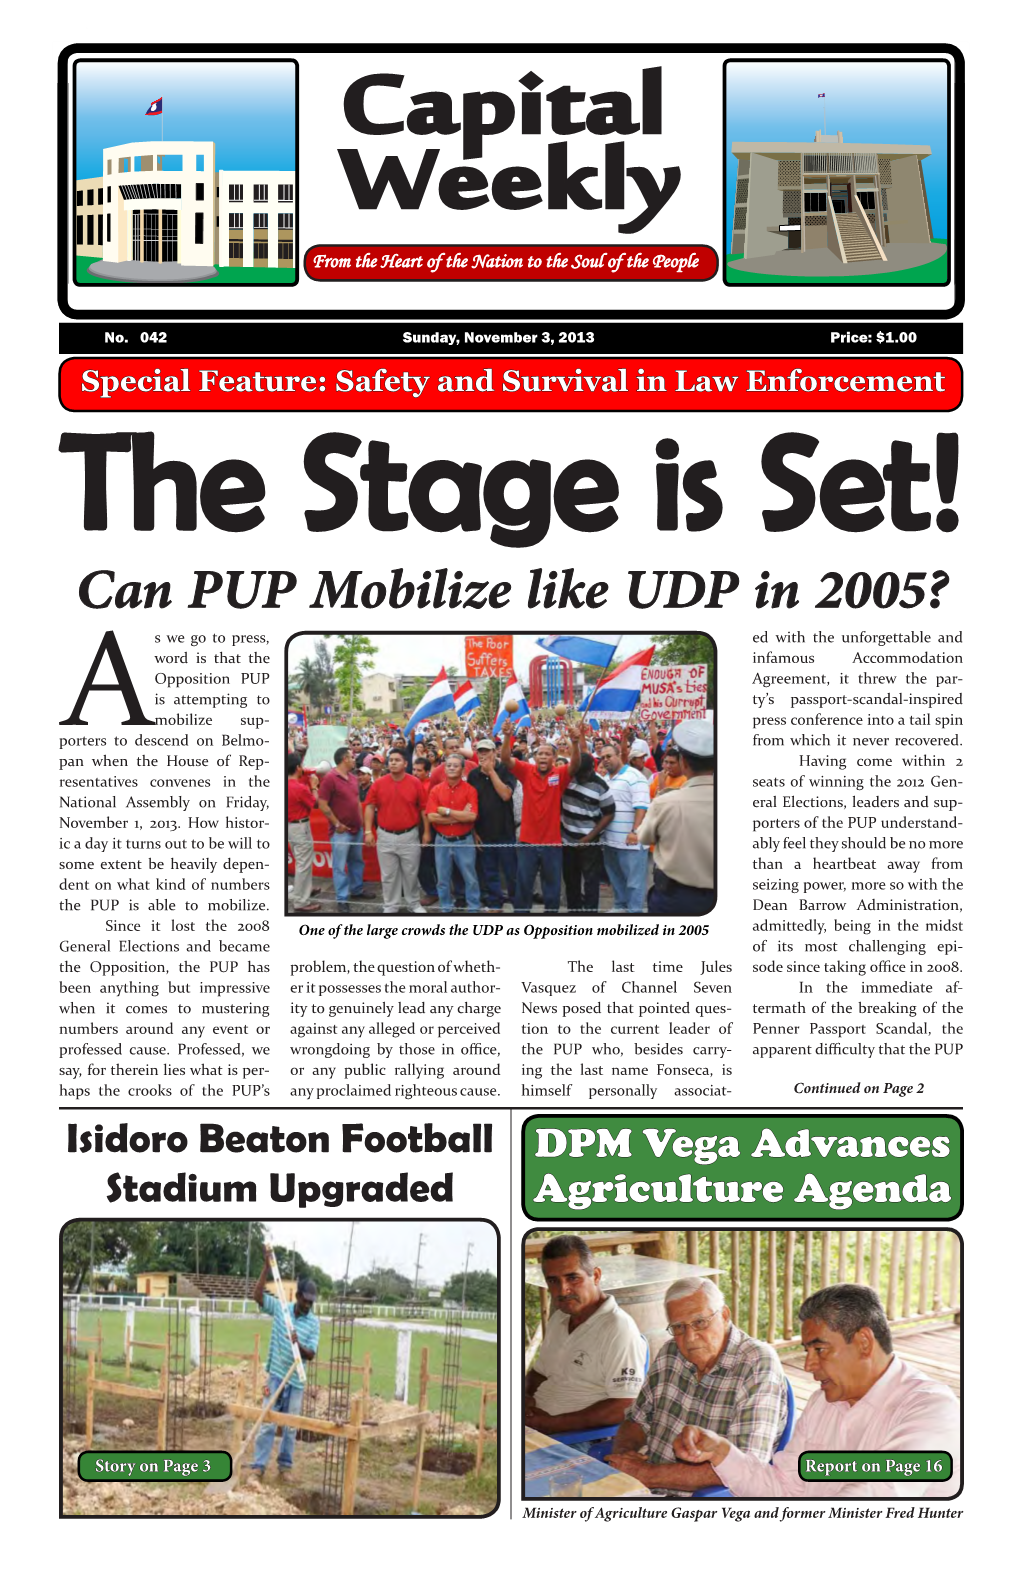 Can PUP Mobilize Like UDP in 2005?